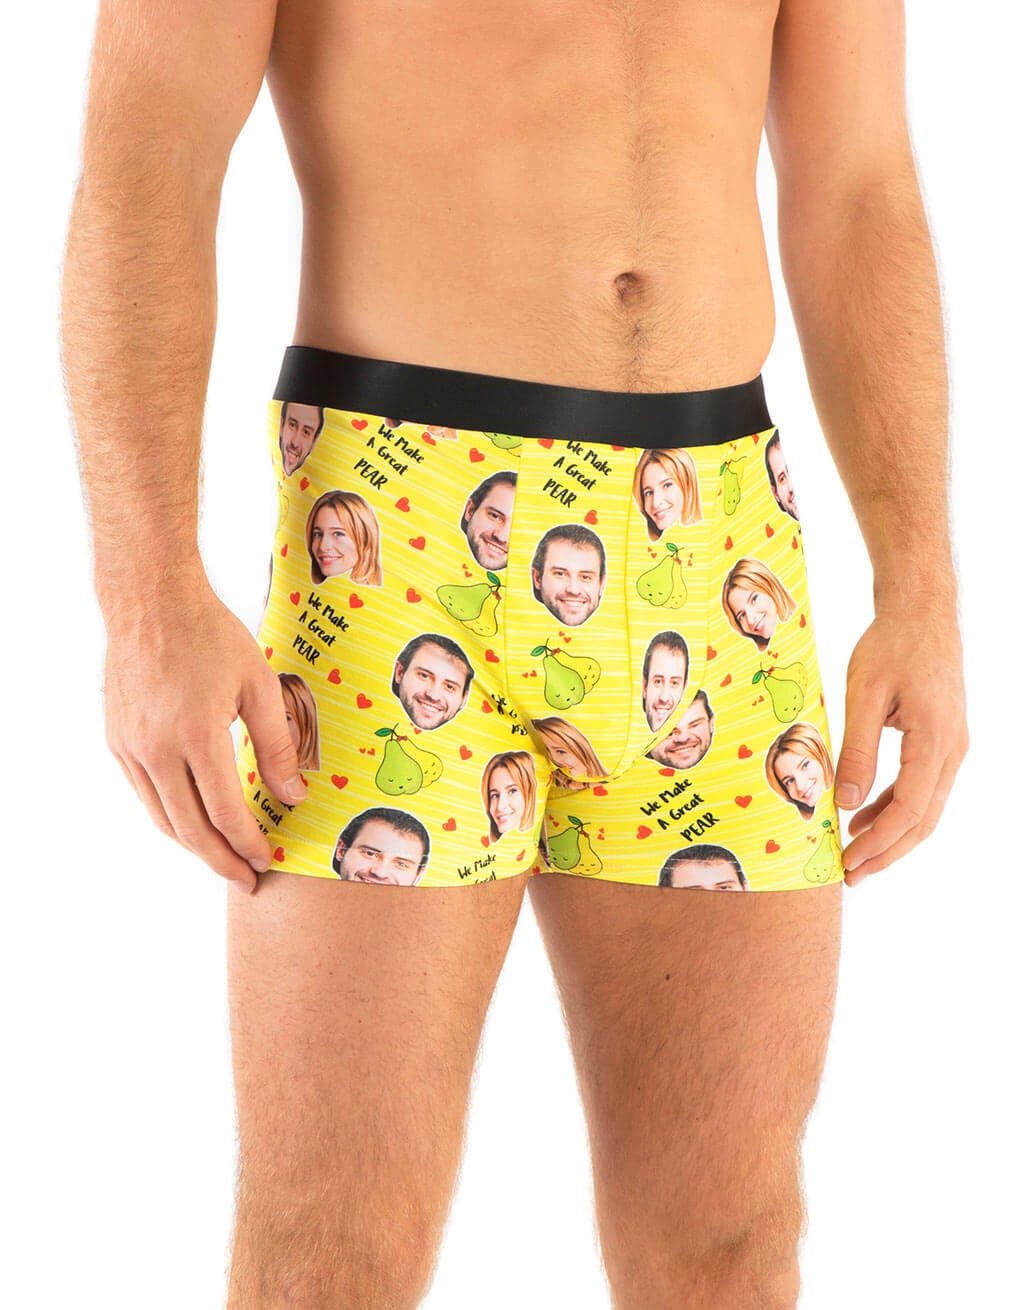 Personalised Great Pear Boxers